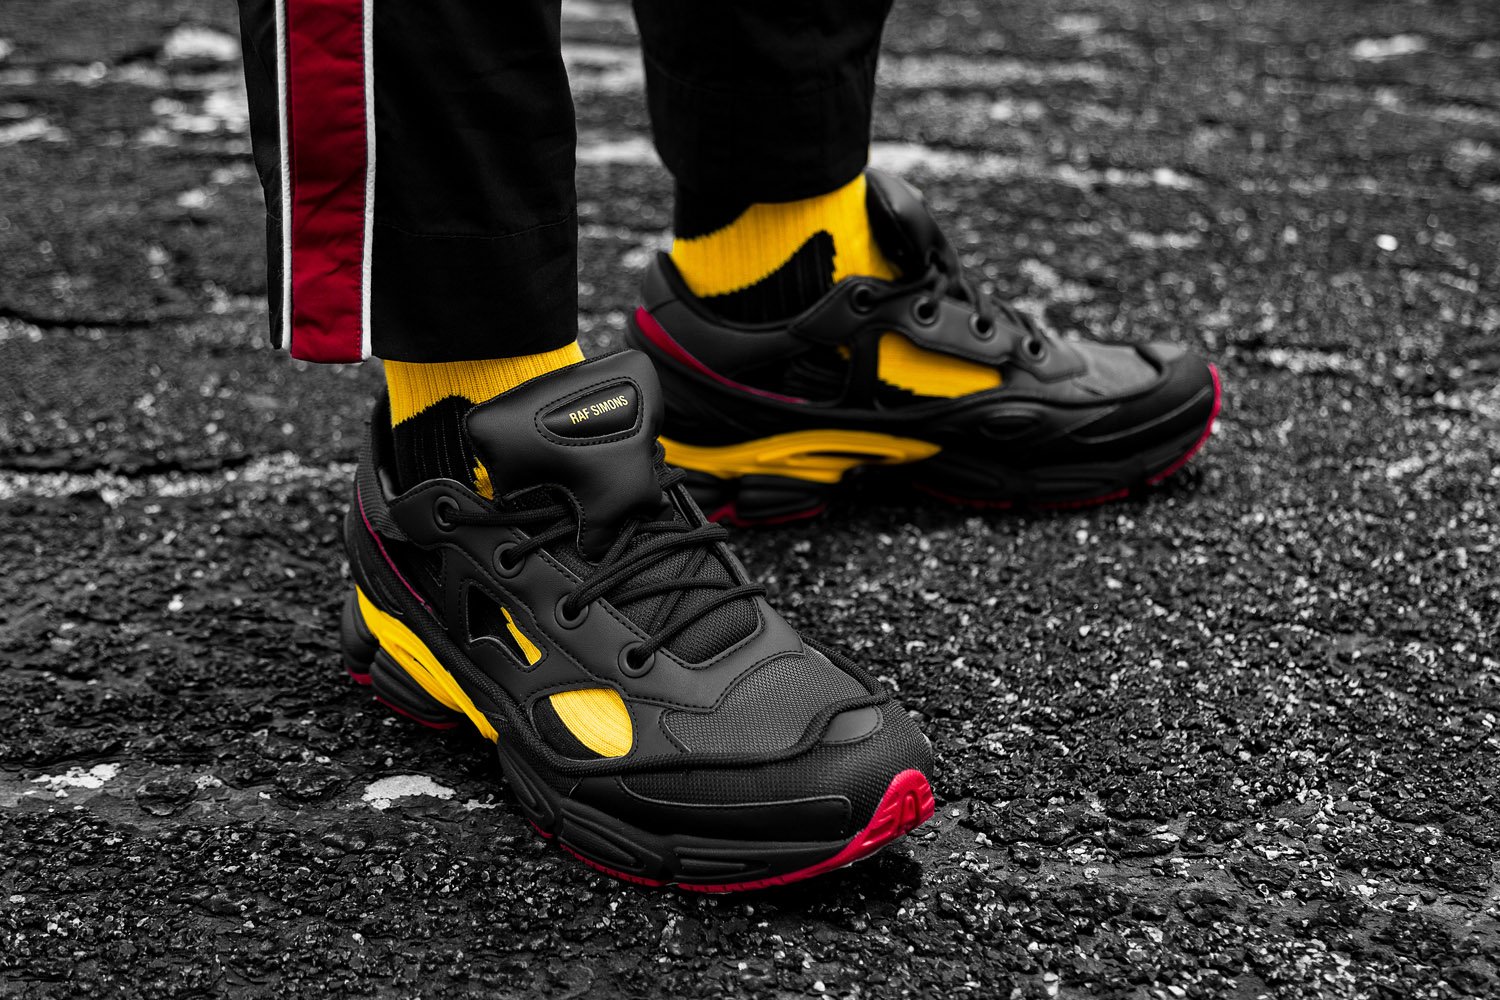 Klas berekenen deksel HBX on Twitter: "Special Release: @adidas by Raf Simons Replicant Ozweego " Belgium" now online. The sneaker celebrates the designer's birthplace by  featuring colors of the Belgian flag: black mesh, gold heel caps